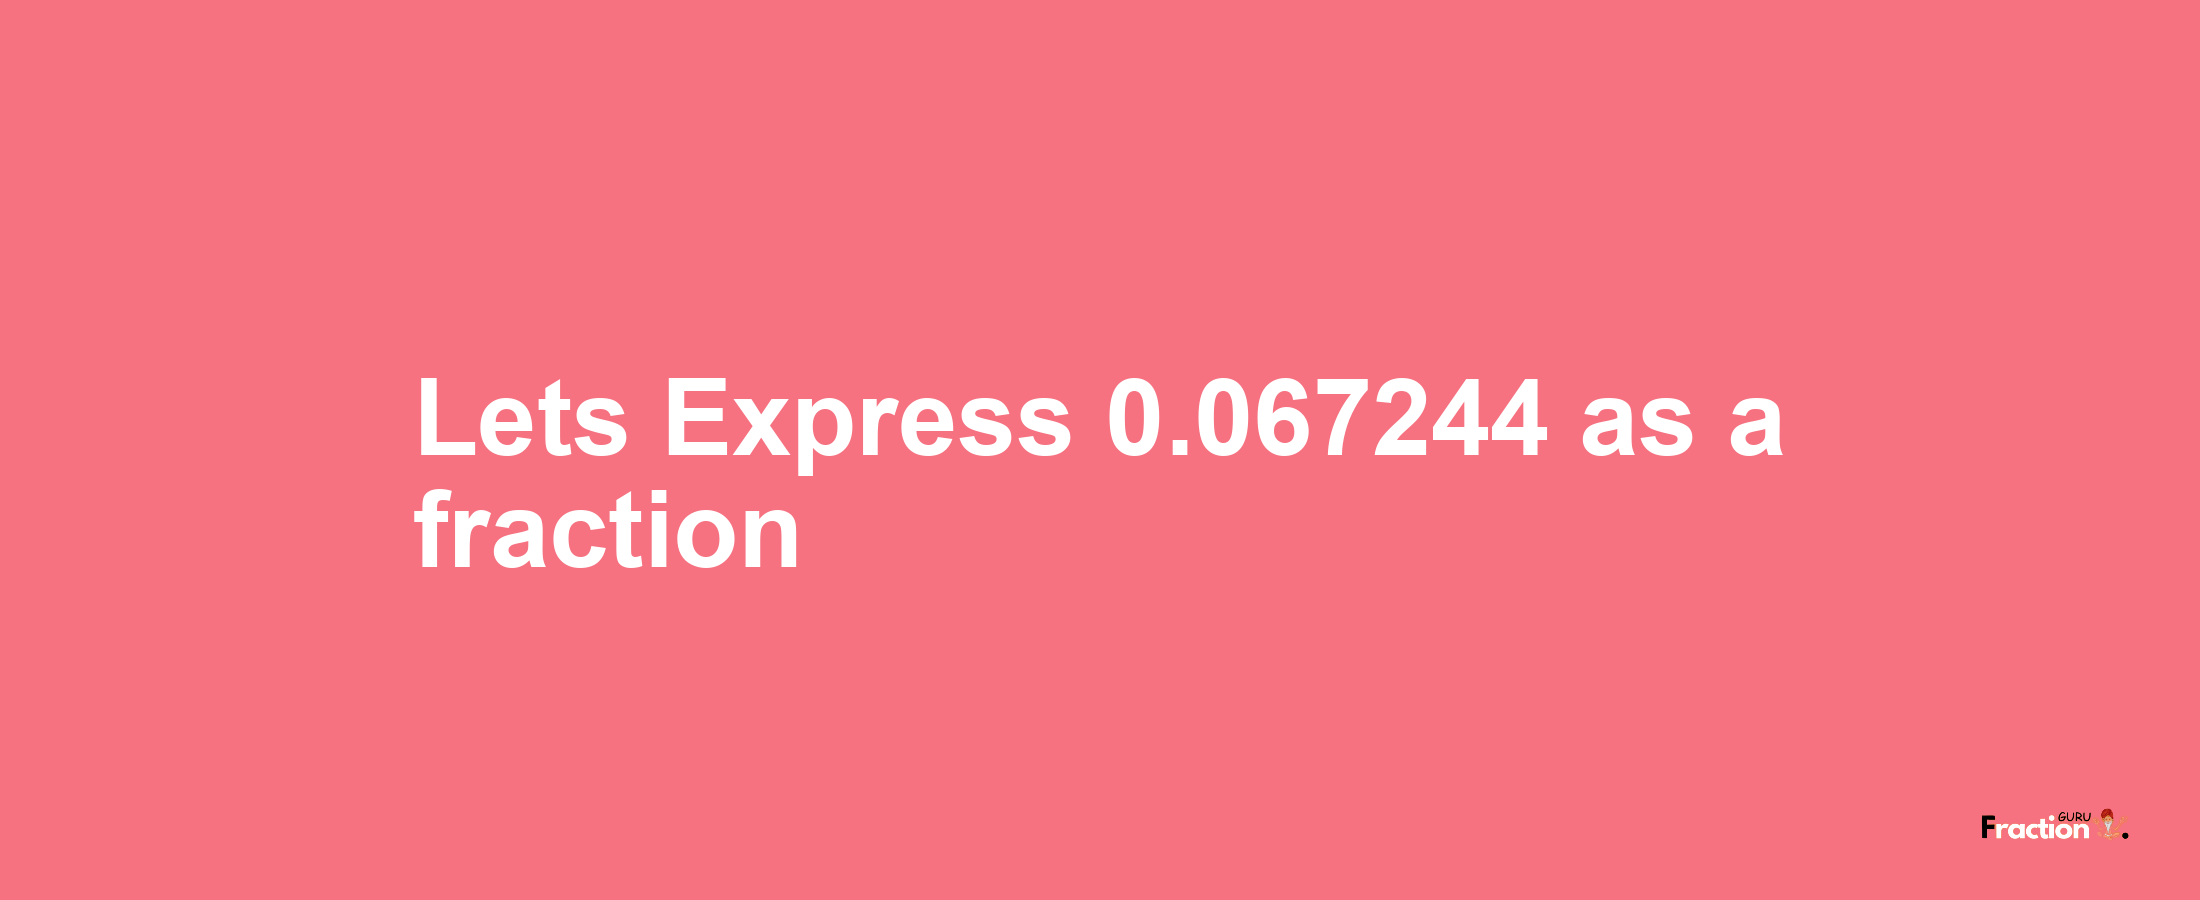 Lets Express 0.067244 as afraction